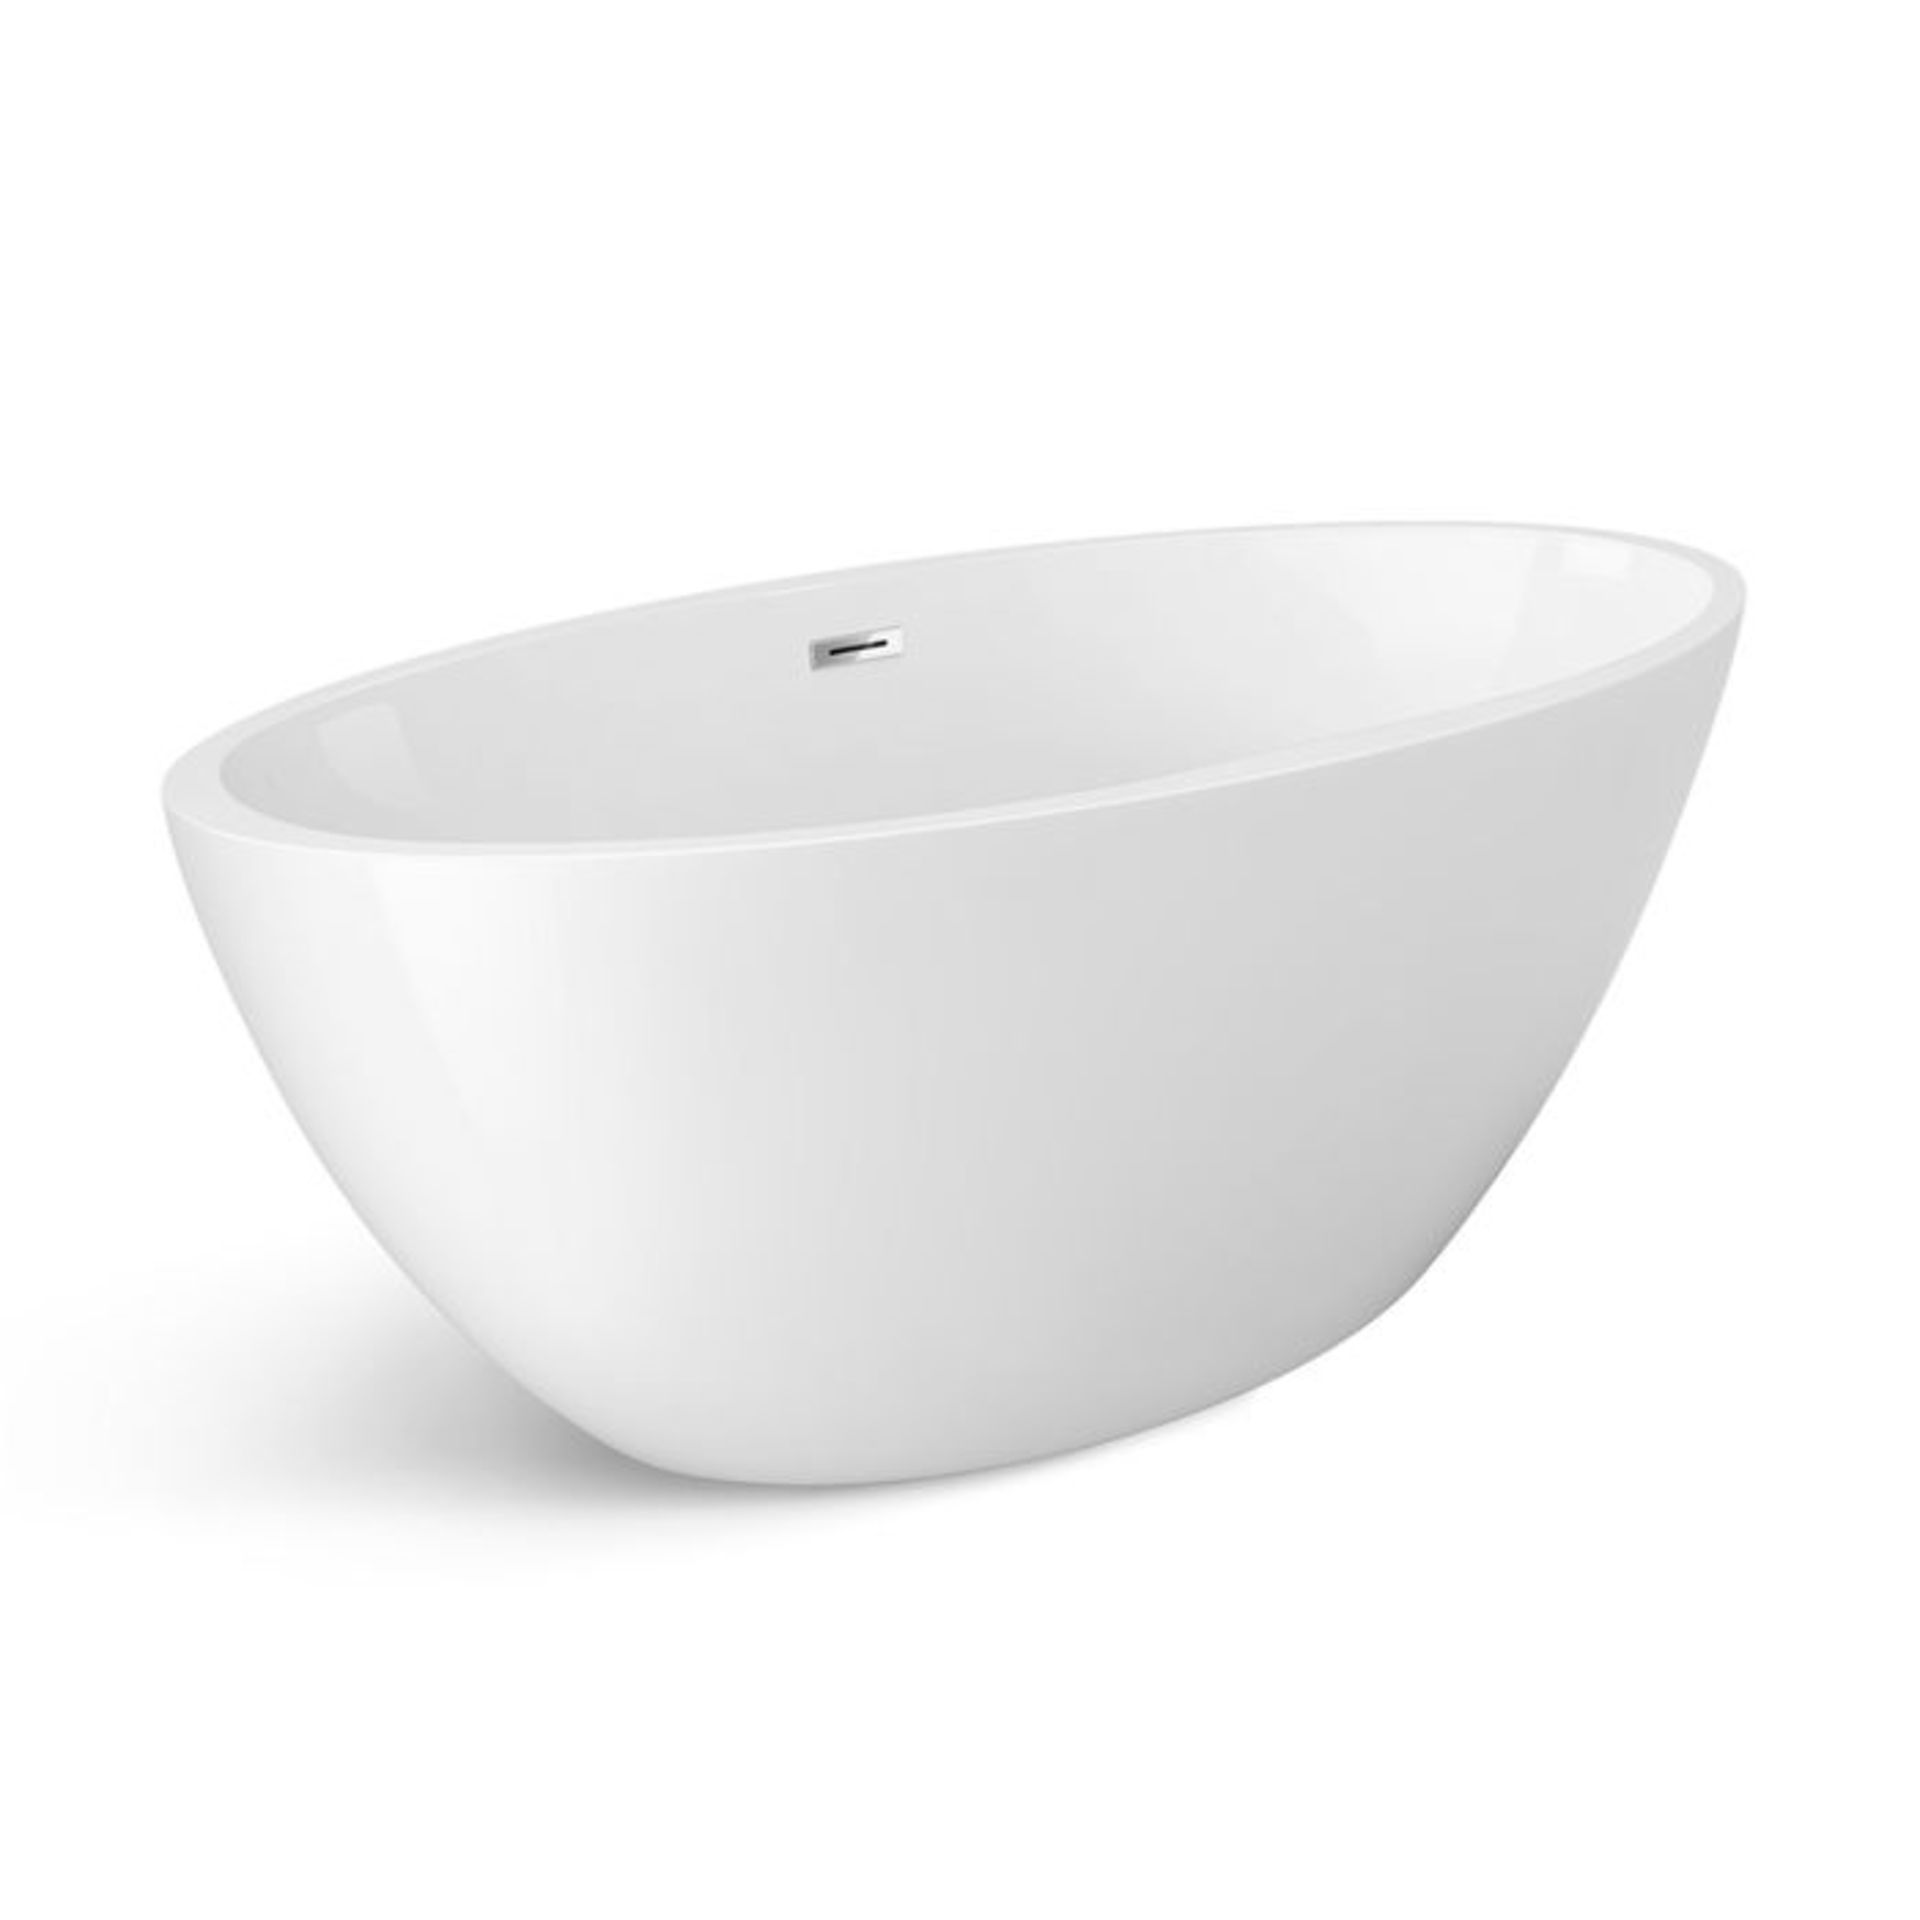 (YC11) 1500x720mm Belle Freestanding Bath. Manufactured from high quality gloss acrylic for a - Image 3 of 4